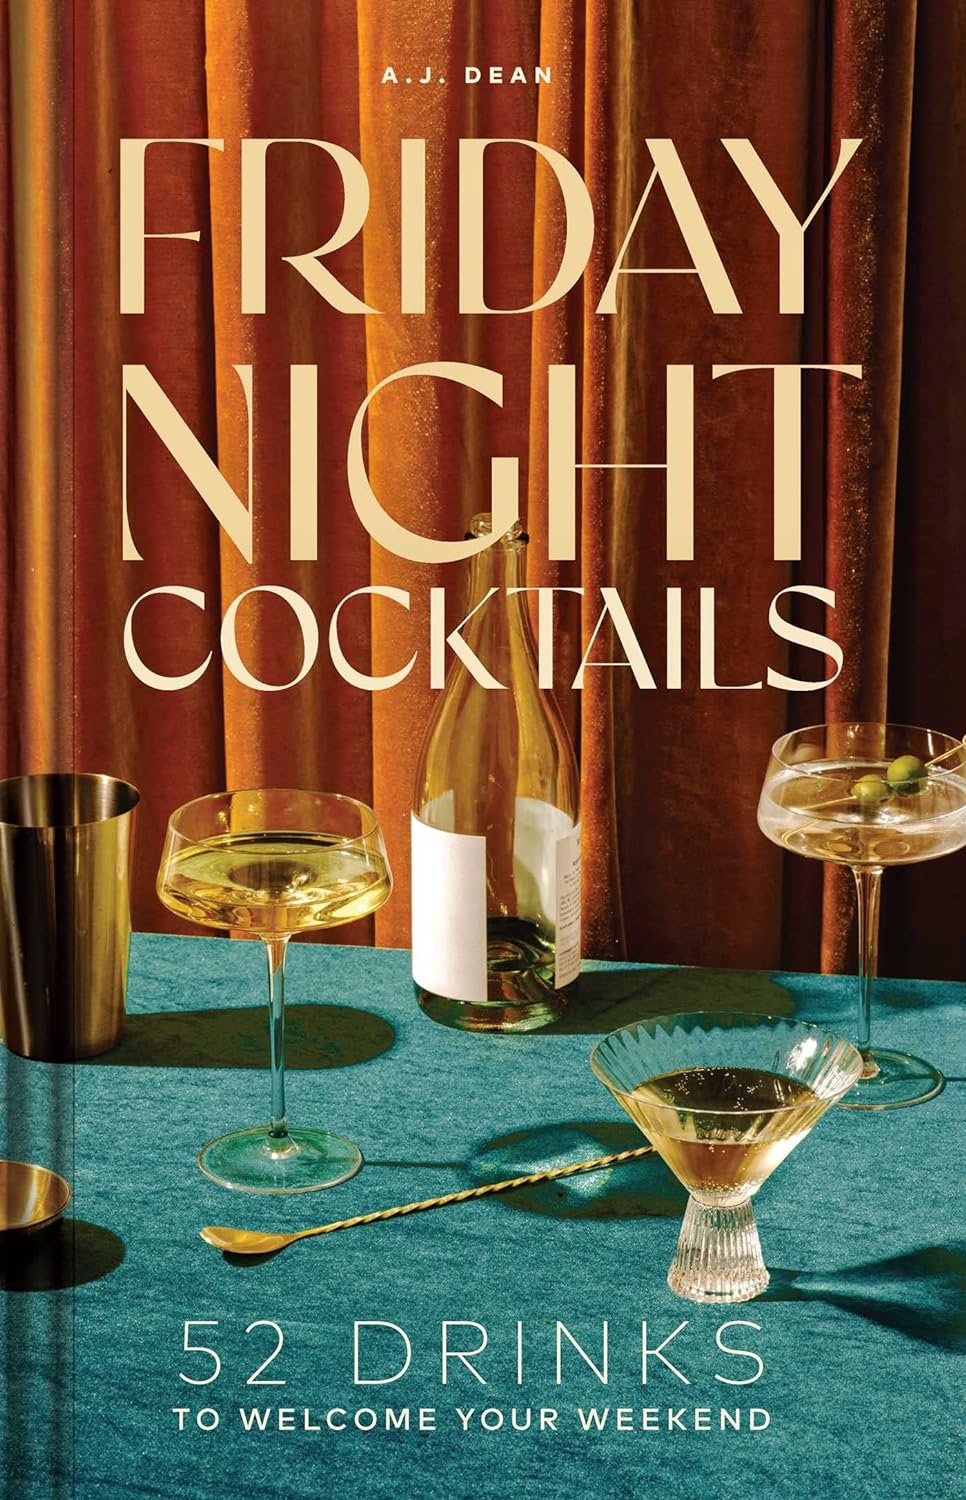 Friday Night Cocktails - 52 Drinks to Welcome Your Weekend - A.J. Dean